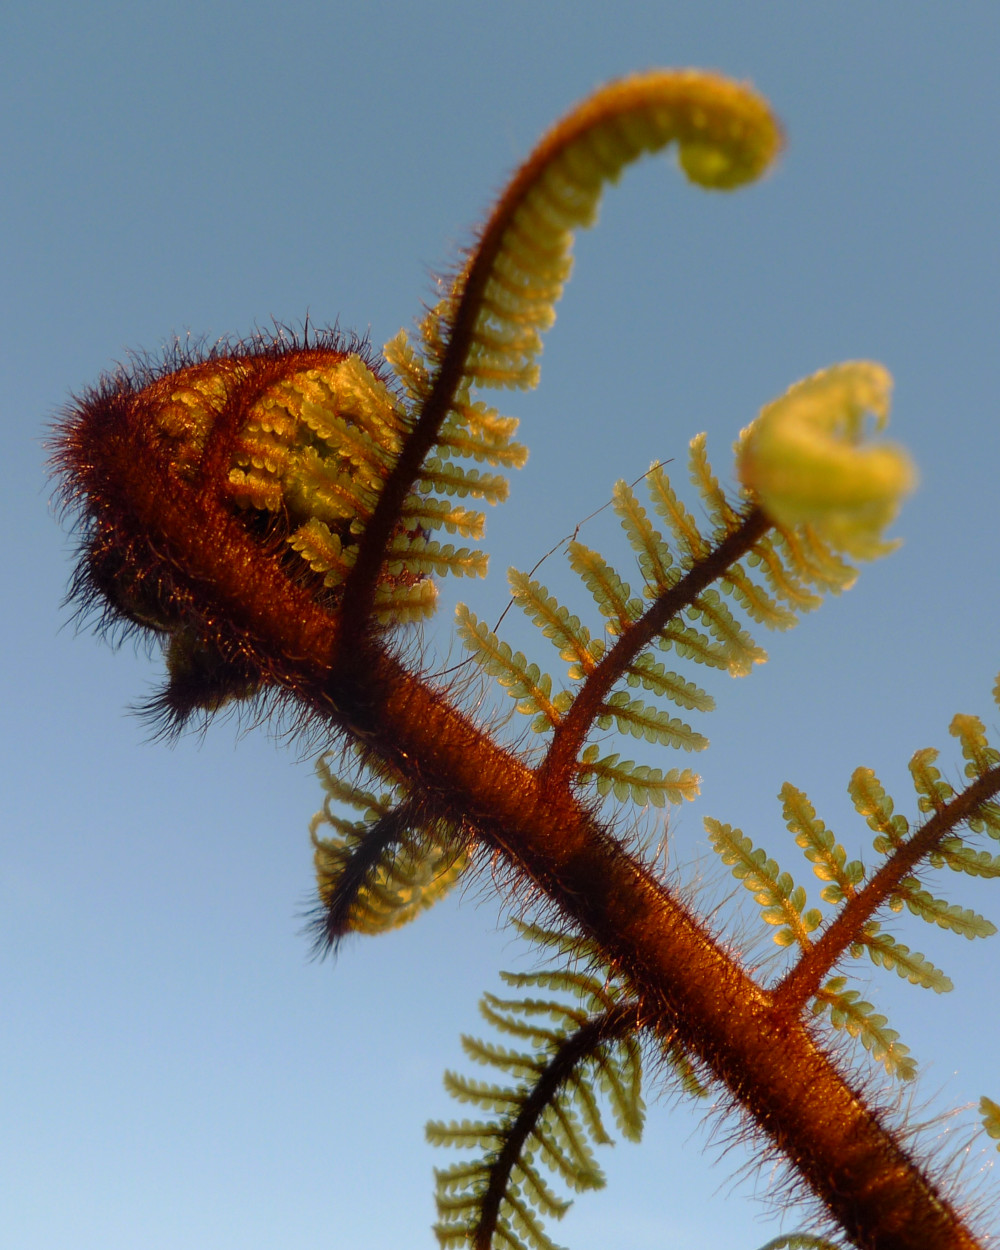 Picture of a ponga frond